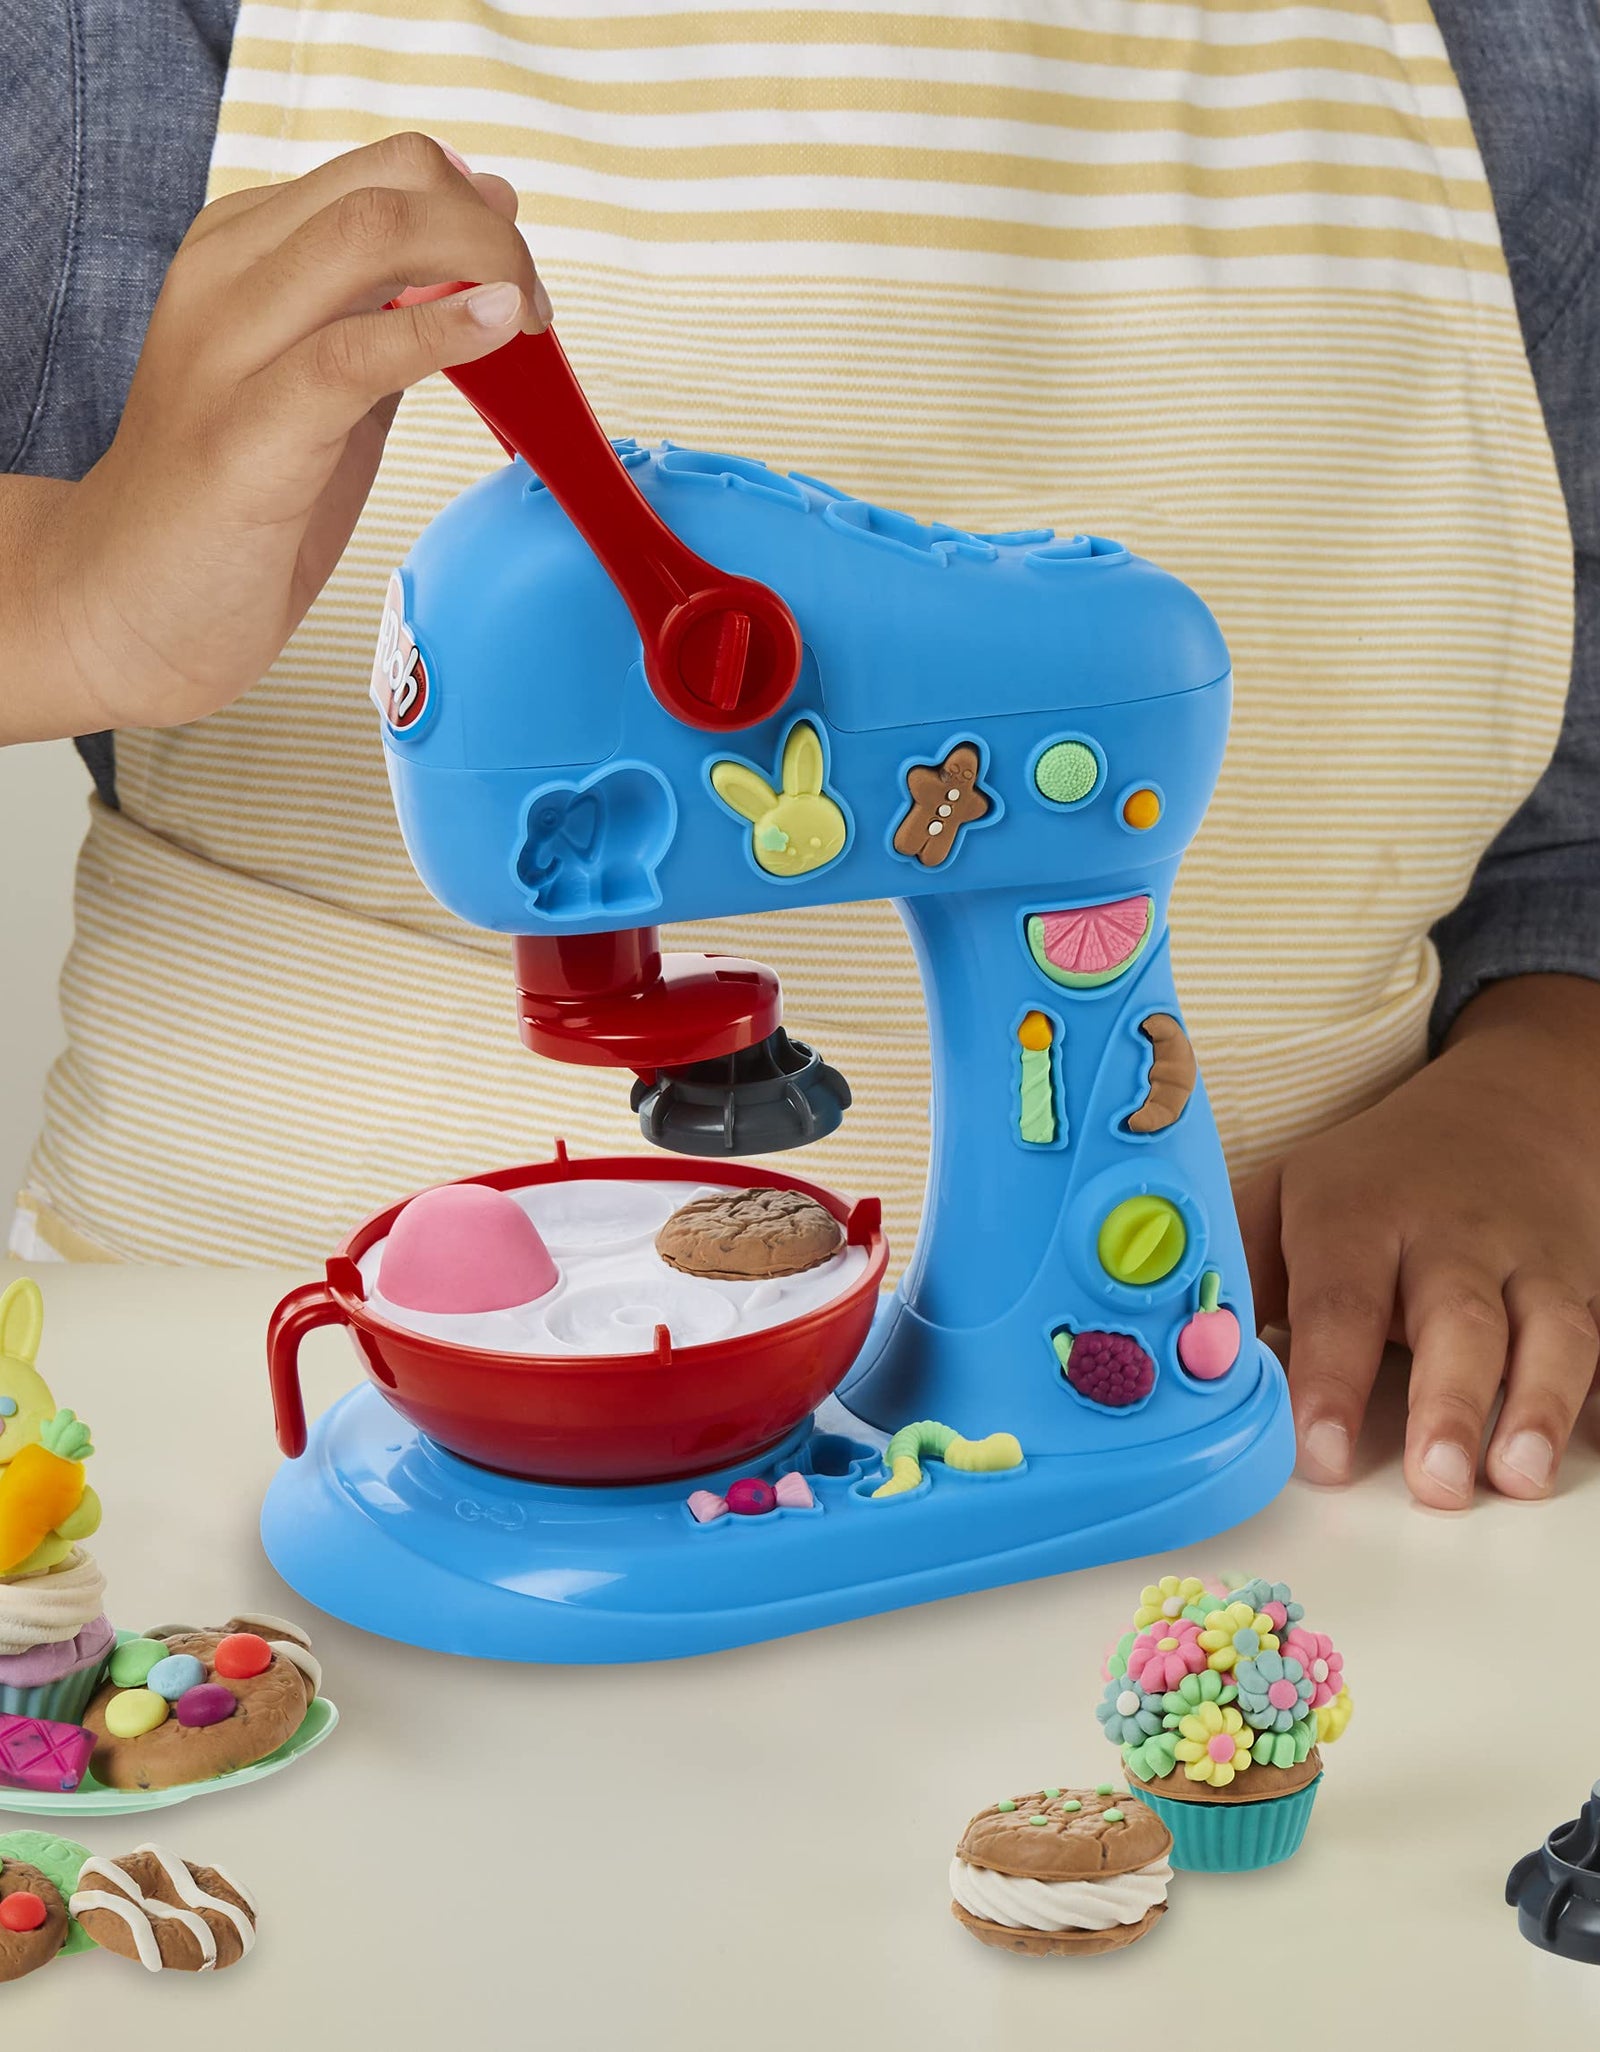 Play-Doh Kitchen Creations Ultimate Cookie Baking Playset for Kids 3 Years and Up with Toy Mixer, 25 Tools, and 15 Modeling Compound Cans, Non-Toxic (Amazon Exclusive)